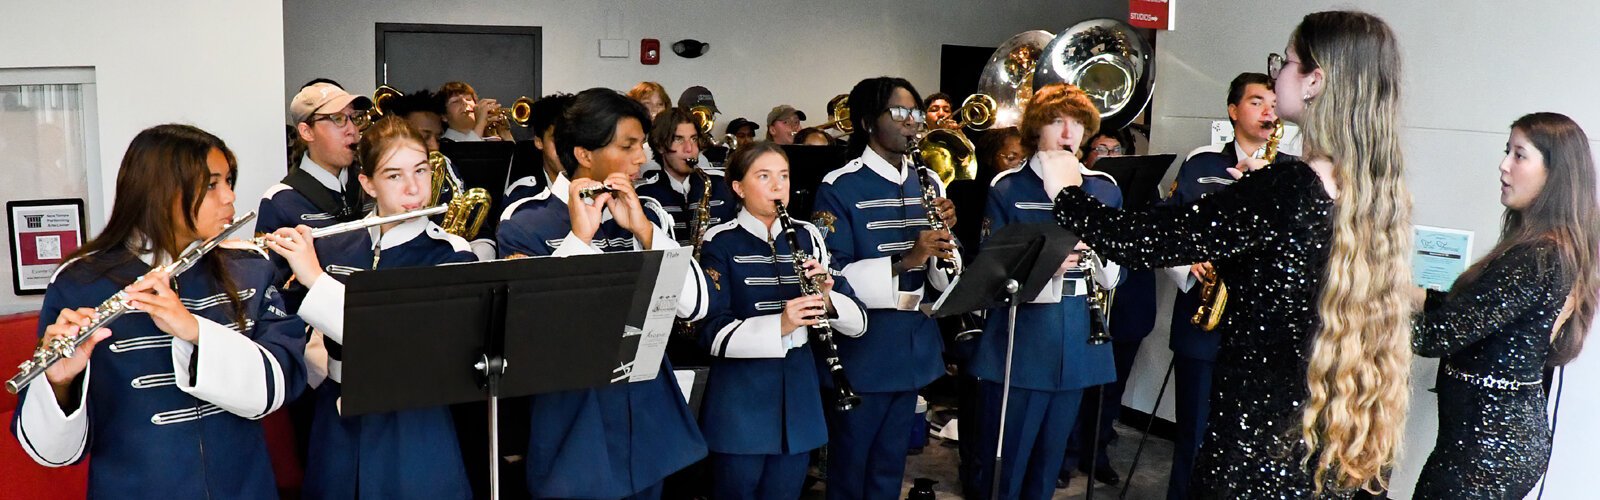 The Wharton High School Pep Band gives a sample of their repertoire in the lobby of the New Tampa Performing Arts Center during the inaugural Fall Festival.